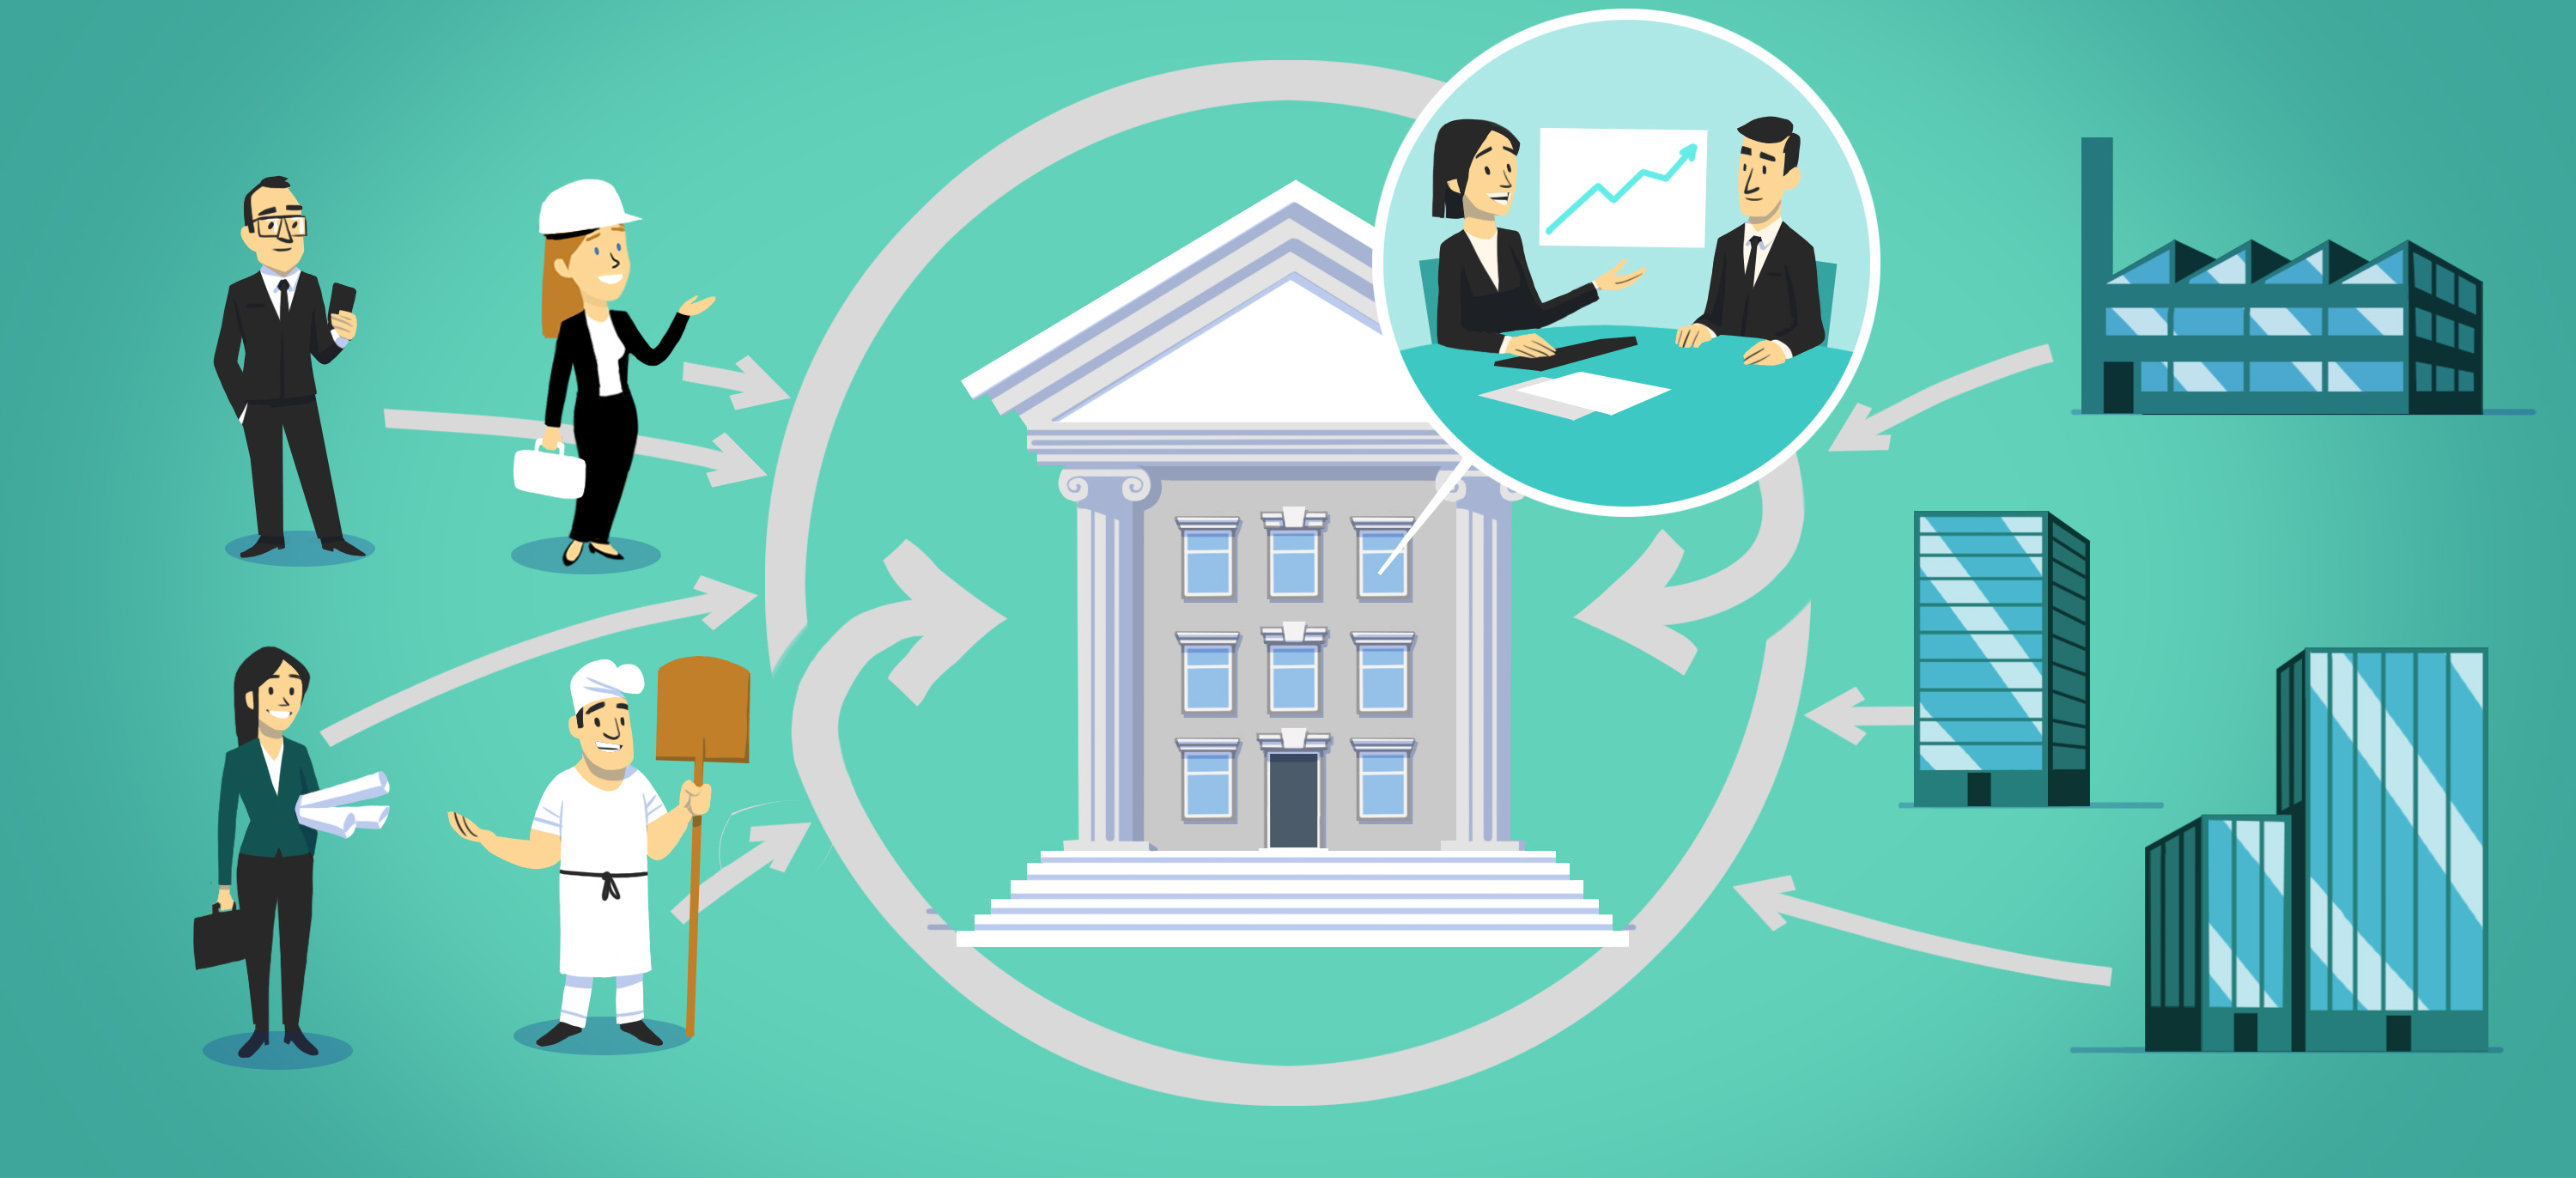 The saver, the bank, and the borrower are shown in the cycle. The bank can be seen as a building in the middle. An advisor having a client consultation is shown inside.